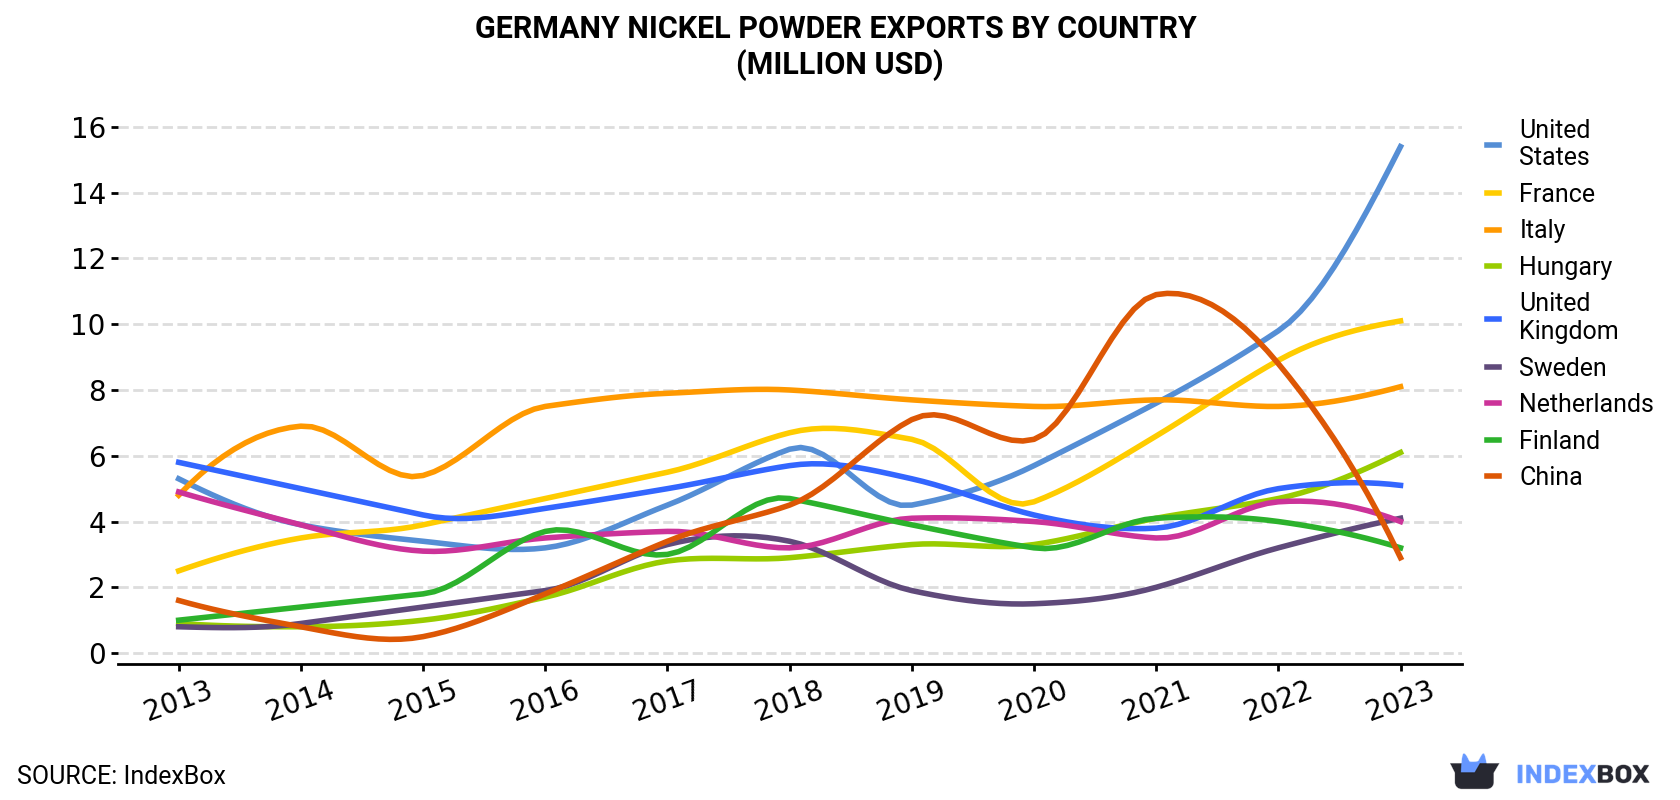 Germany Nickel Powder Exports By Country (Million USD)